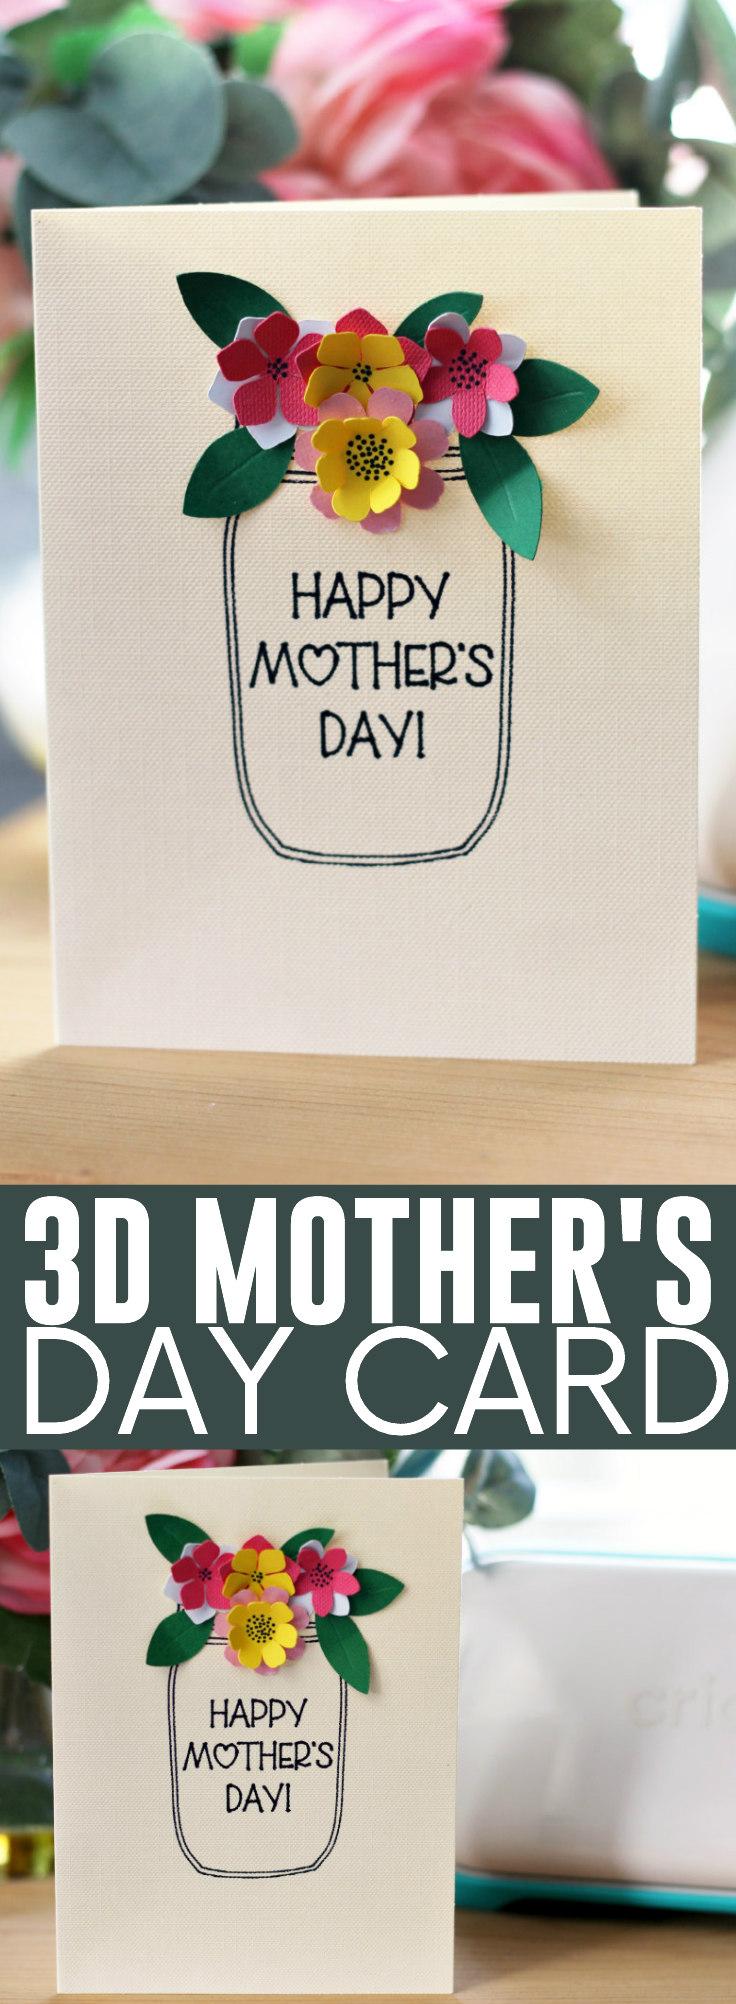 3D Mother's Day Card pinnable image.